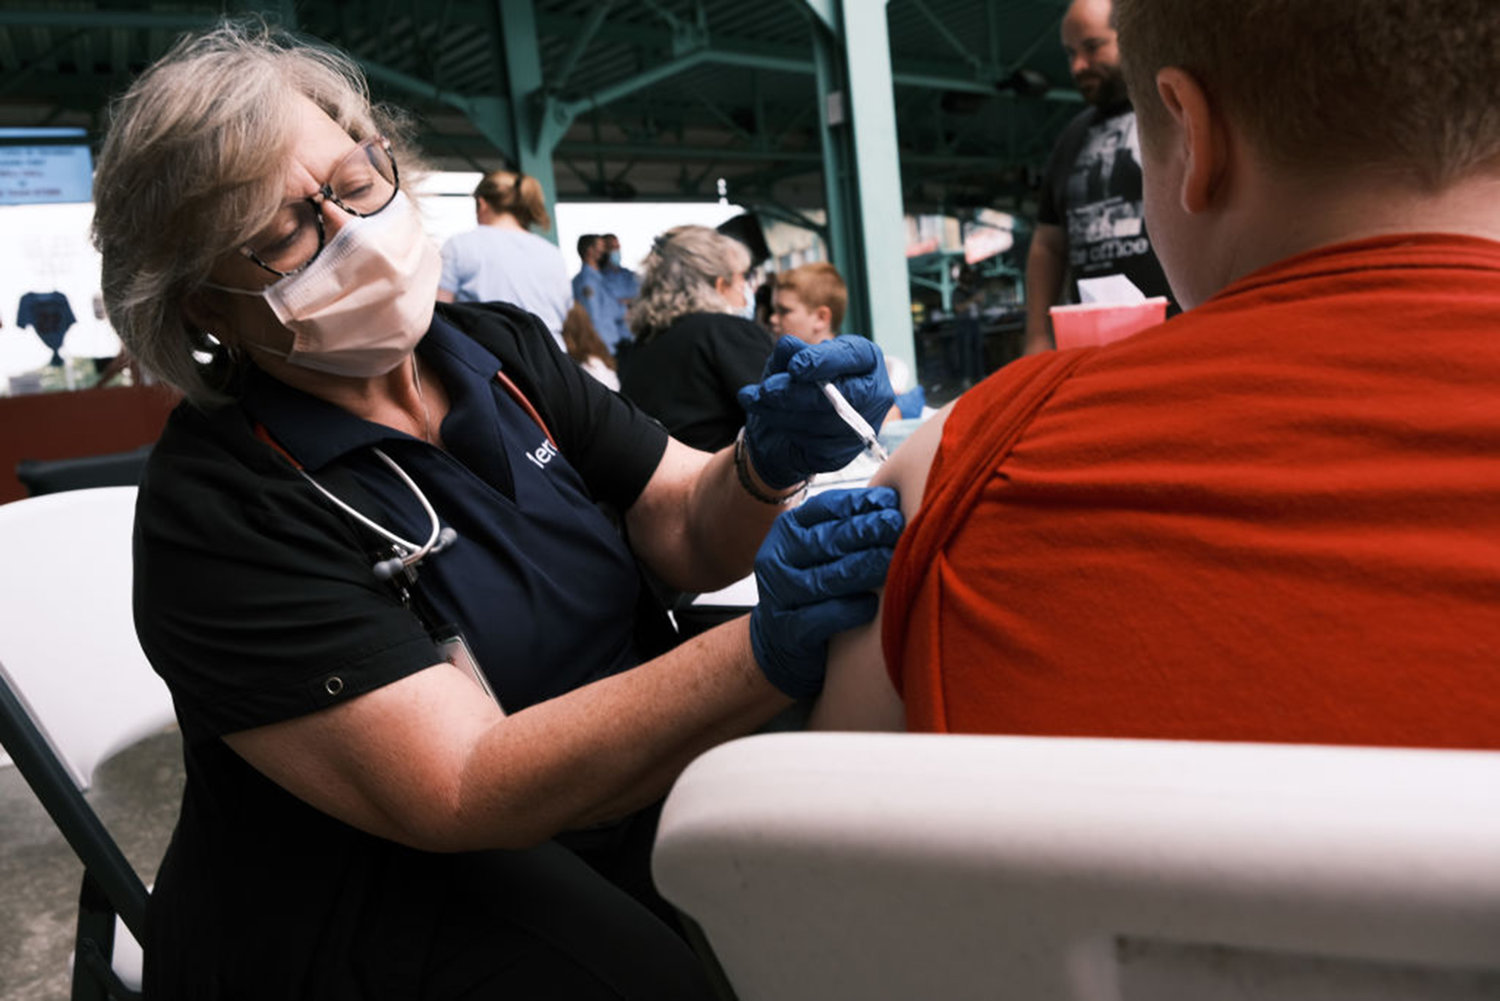 A nurse administers the COVID-19 vaccine to a teen at a baseball game on August 5, 2021 in Springfield, Missouri. (Spencer Platt/Getty Images/TNS)